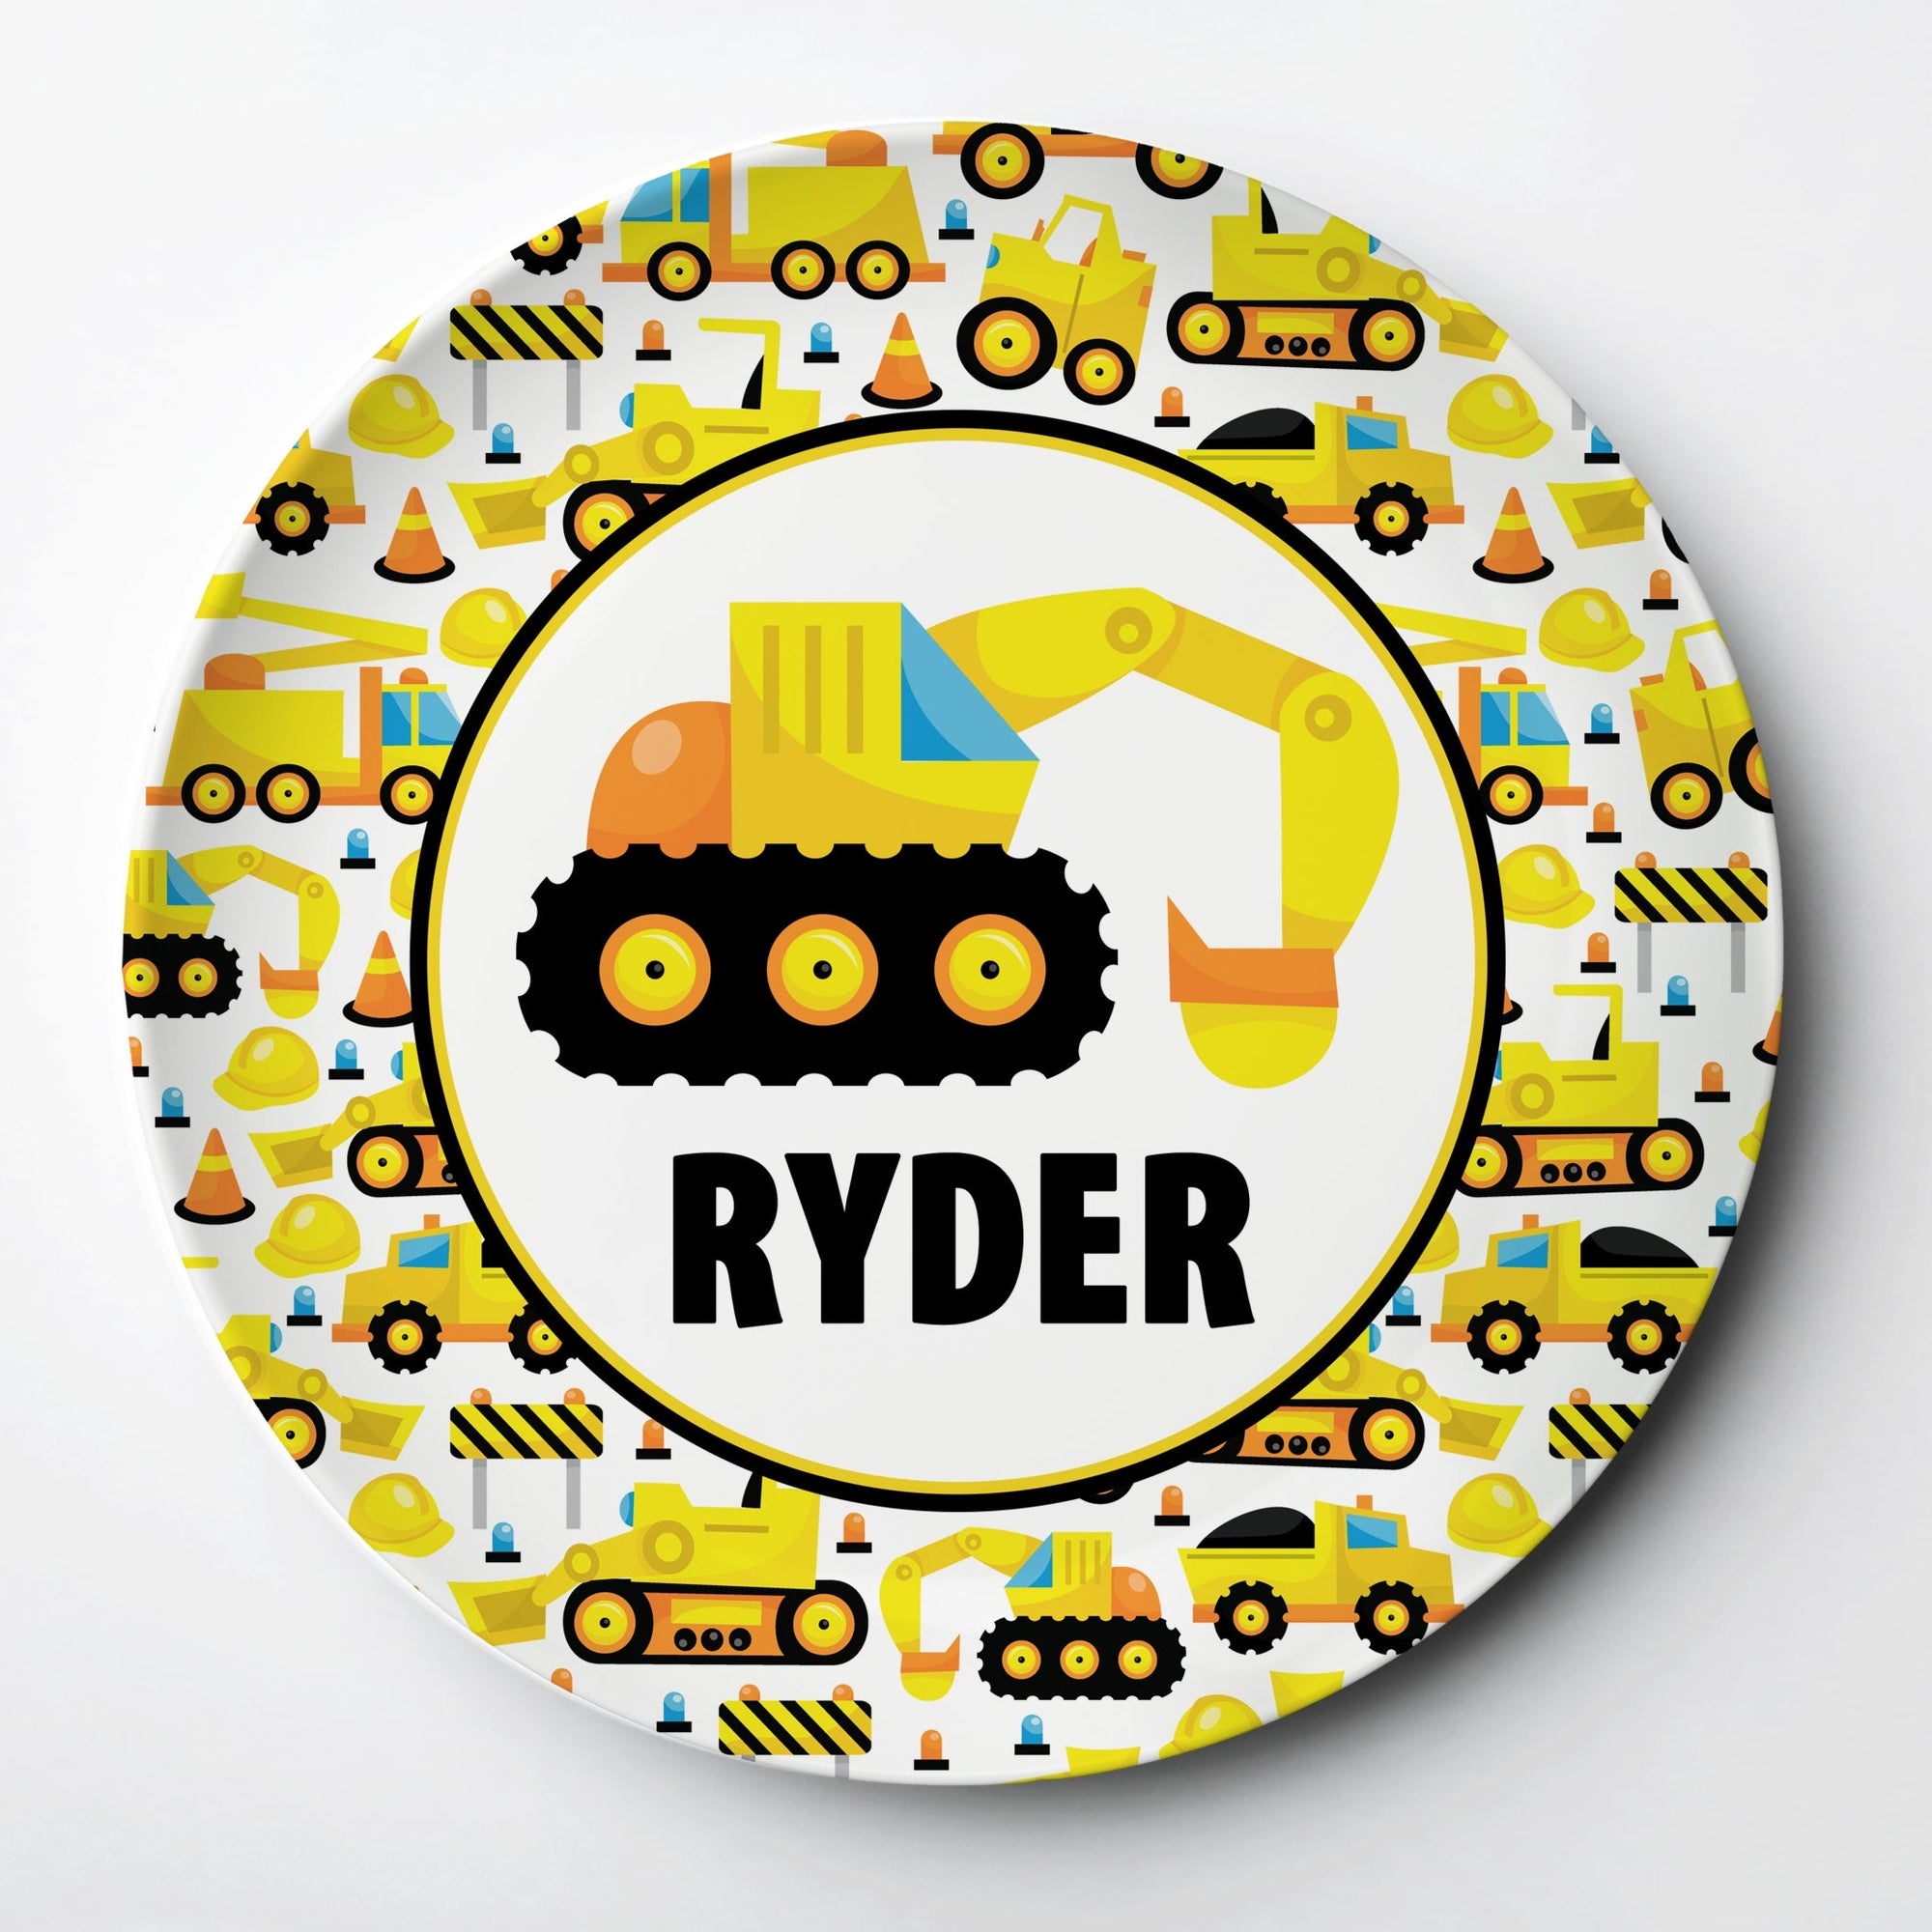 Backhoe Construction Personalized Plate. Thick polymer plate is reusable and lasts for years, microwave, dishwasher, and oven safe